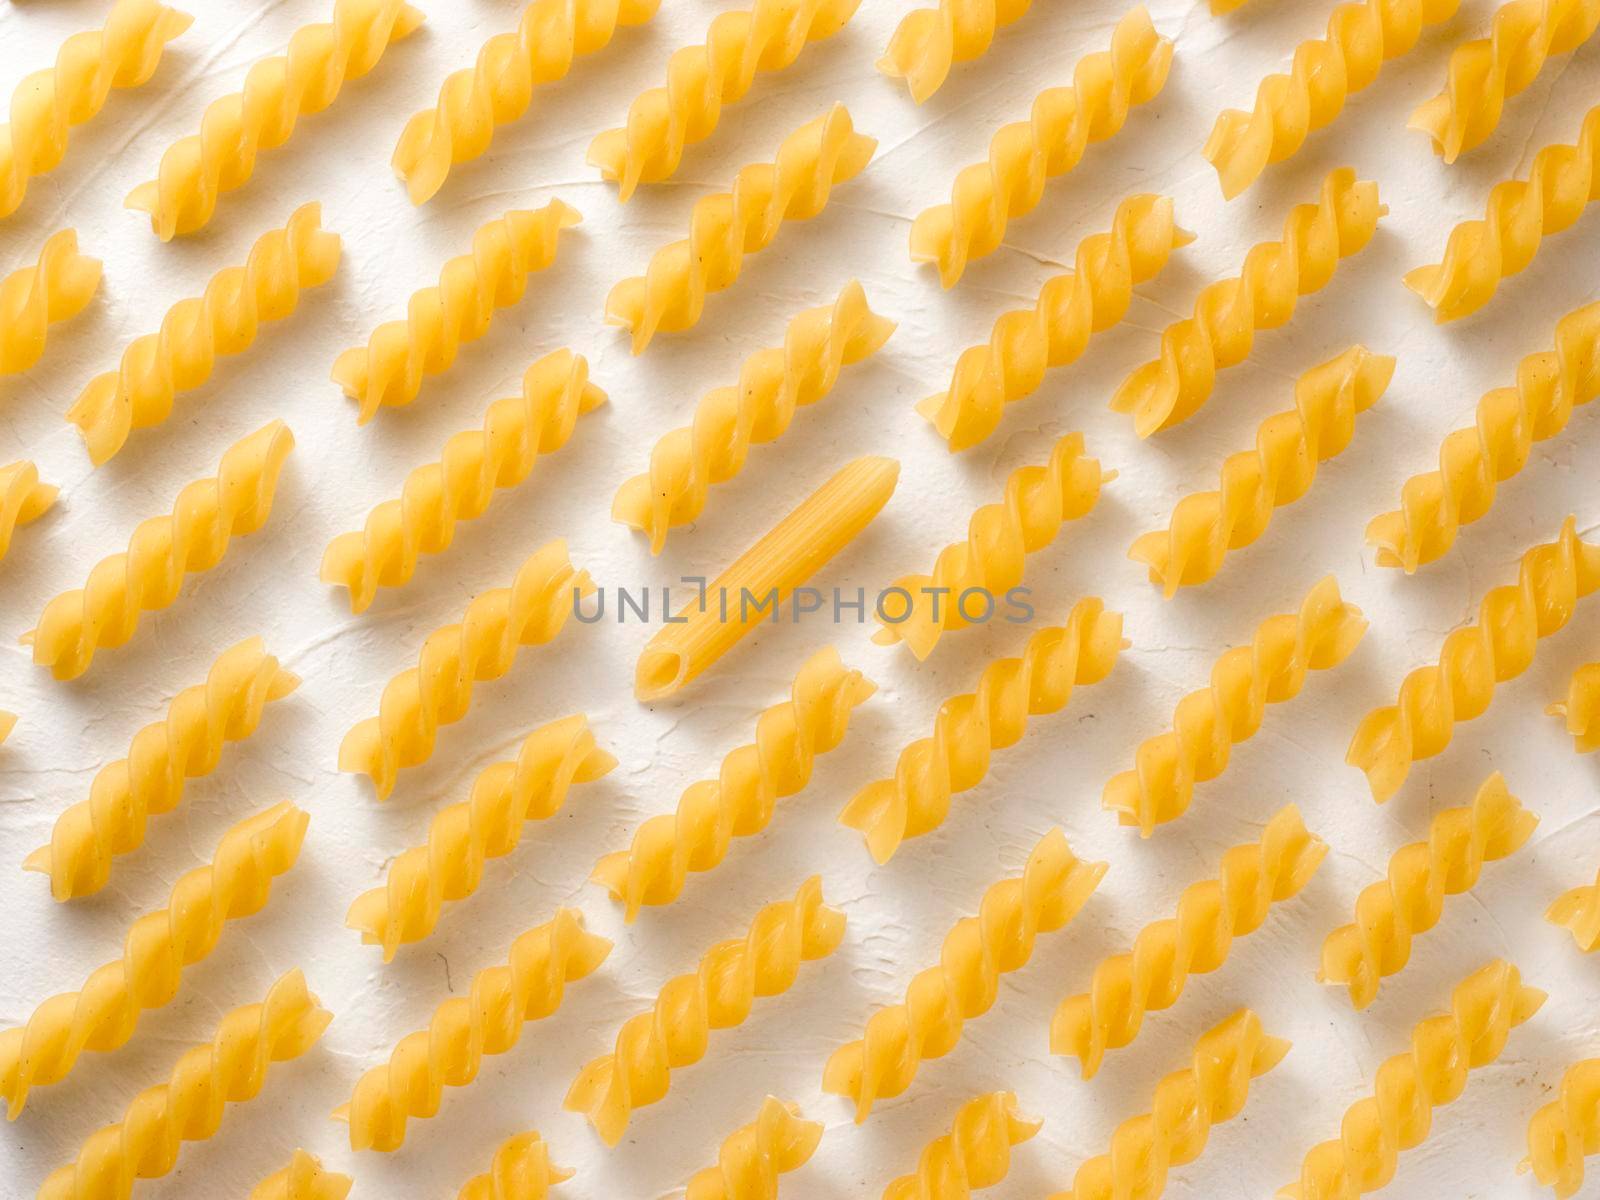 Different thinking concept. Leadership, uniqueness, independence, initiative, dissent, think different, success concept. Raw pasta fusilli and one penne pasta. Food individuality and difference